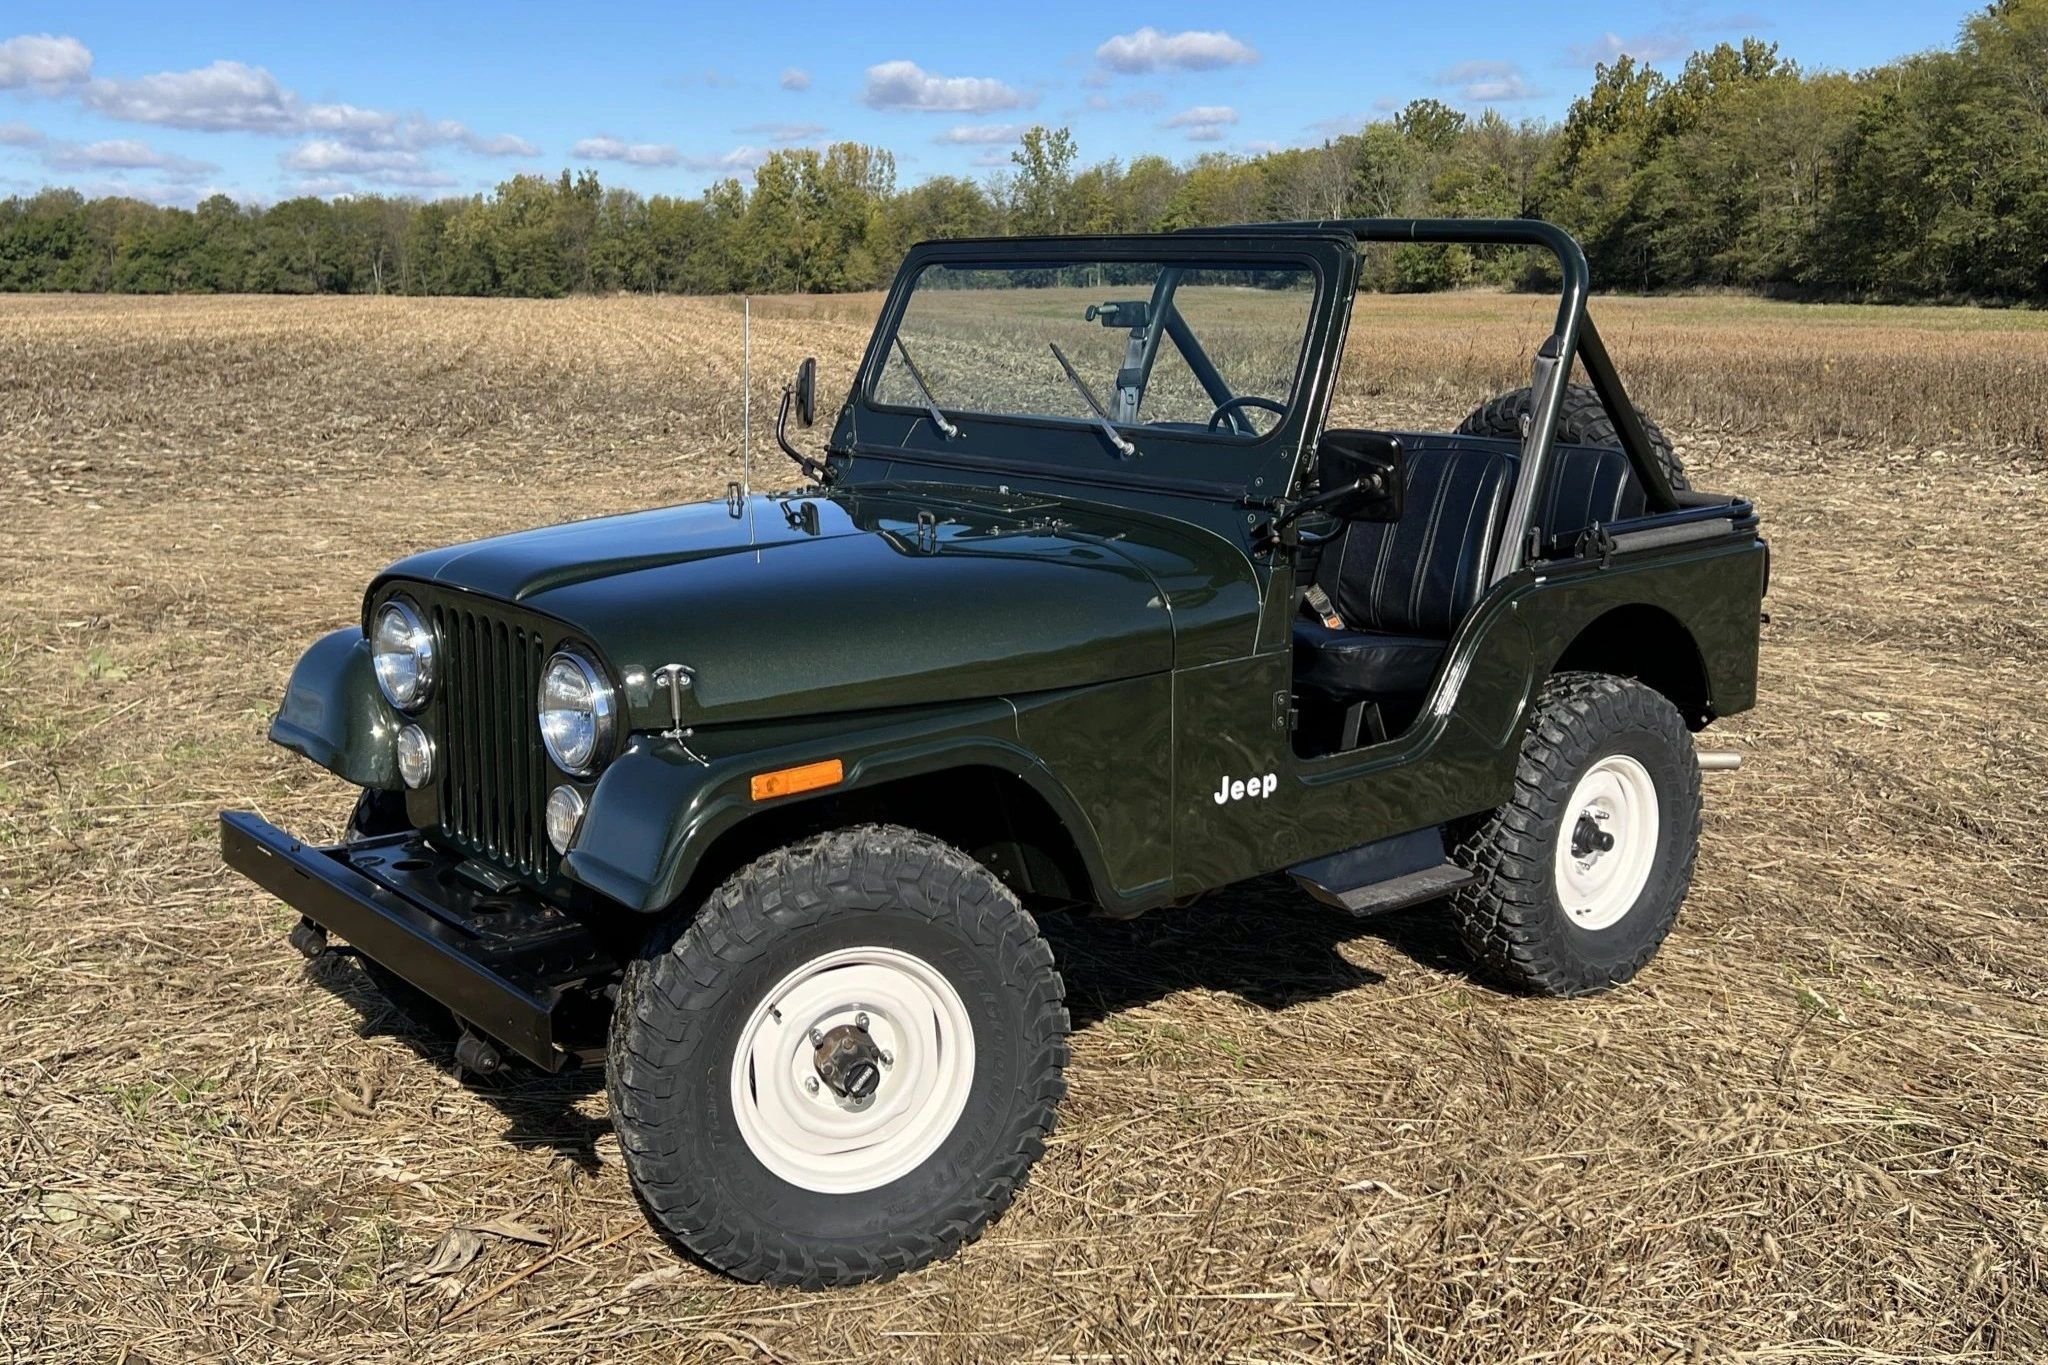 A parked Jeep CJ-5 from 1983